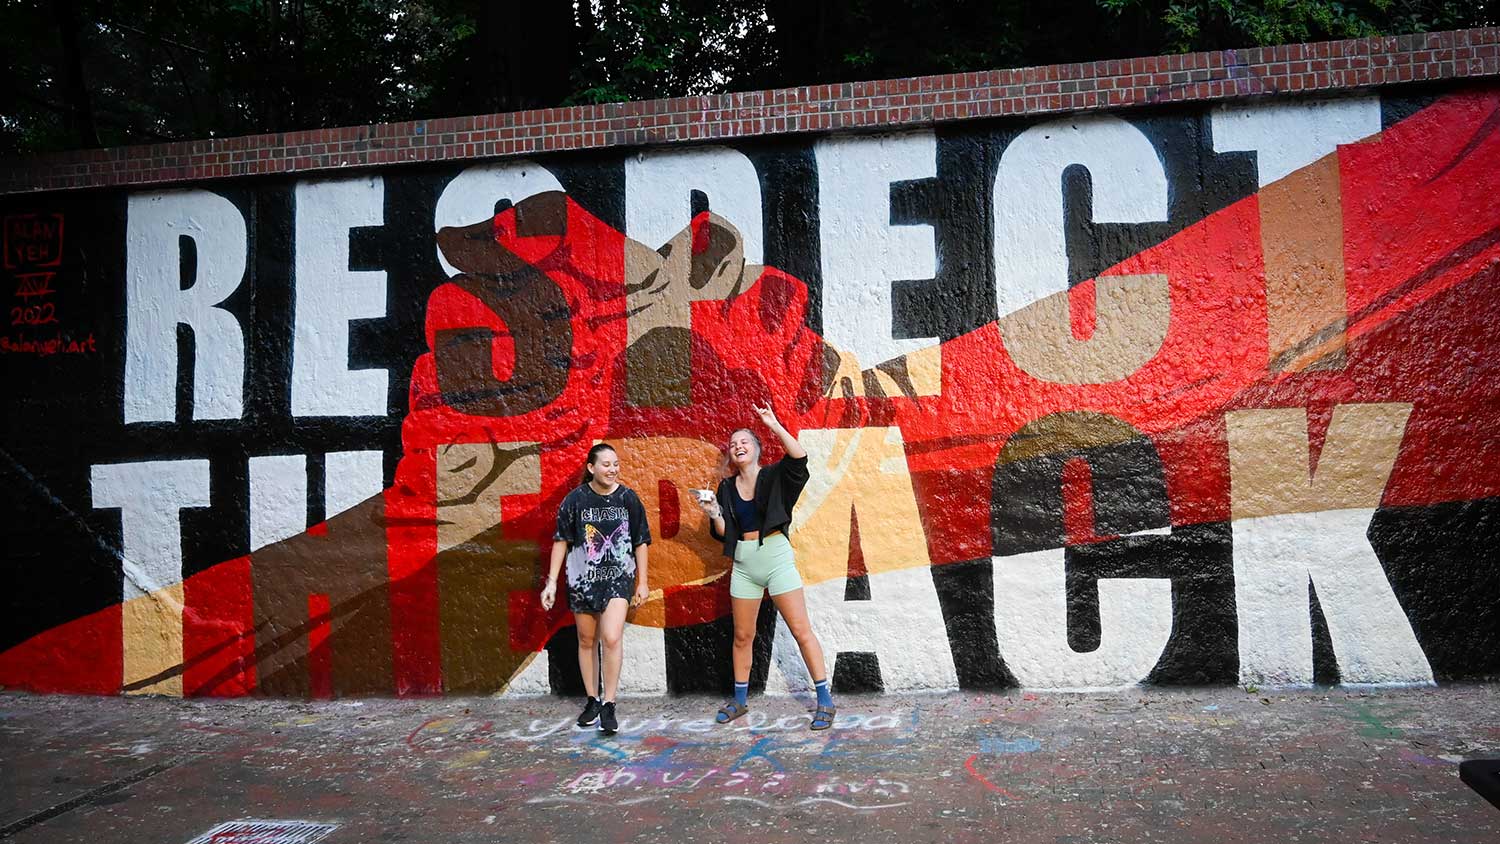 The Free Expression Tunnel is painted annually with a "Respect the Pack" mural on which our student body adds handprints.